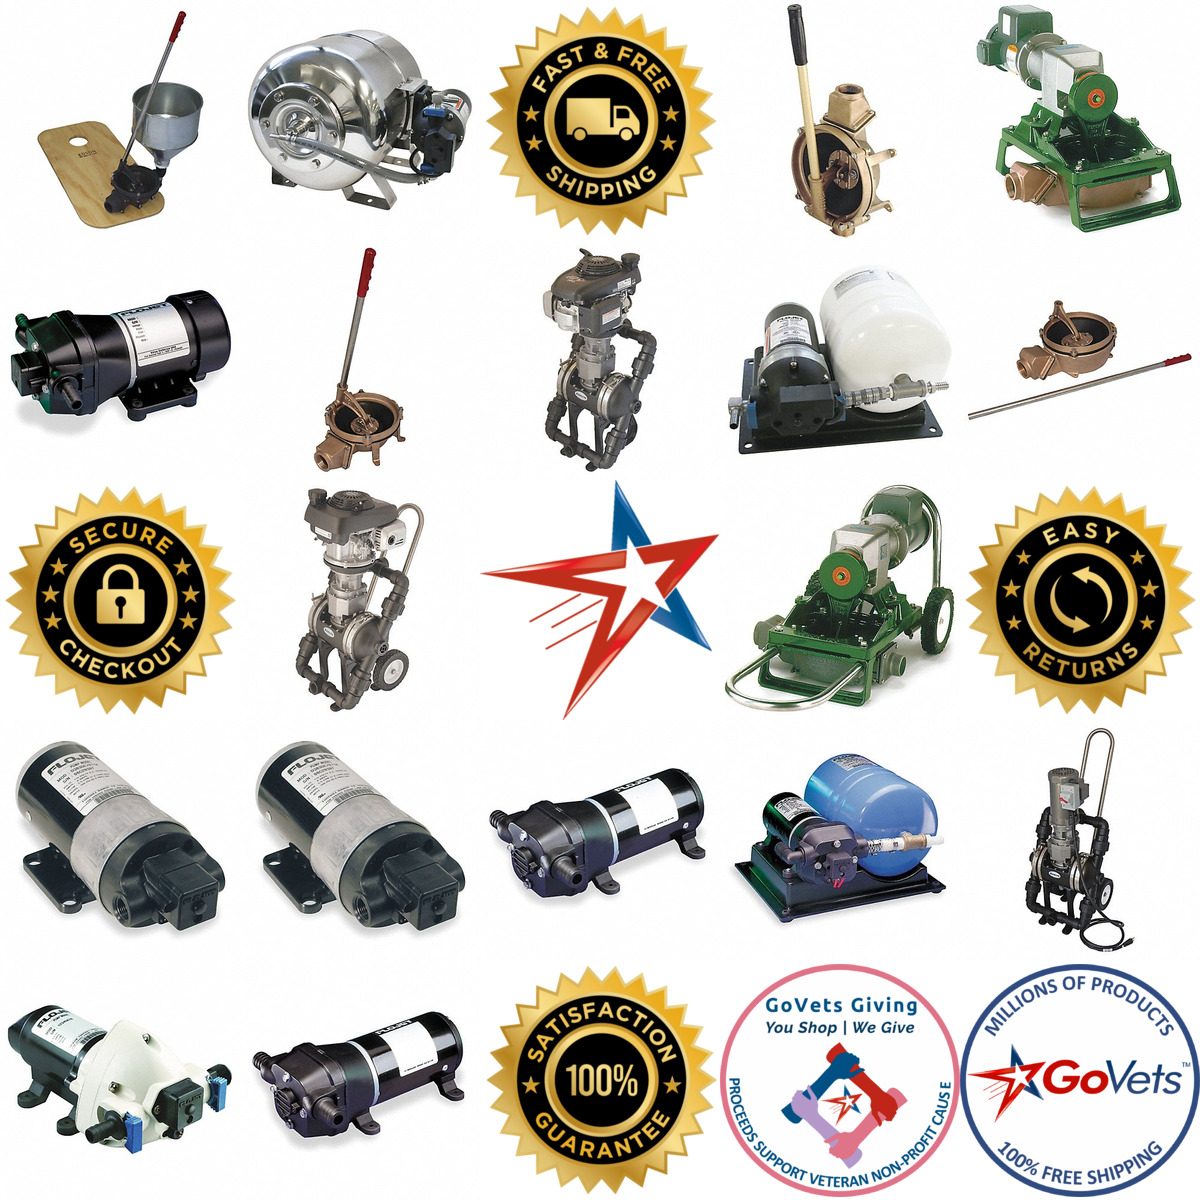 A selection of Industrial Diaphragm Pumps products on GoVets